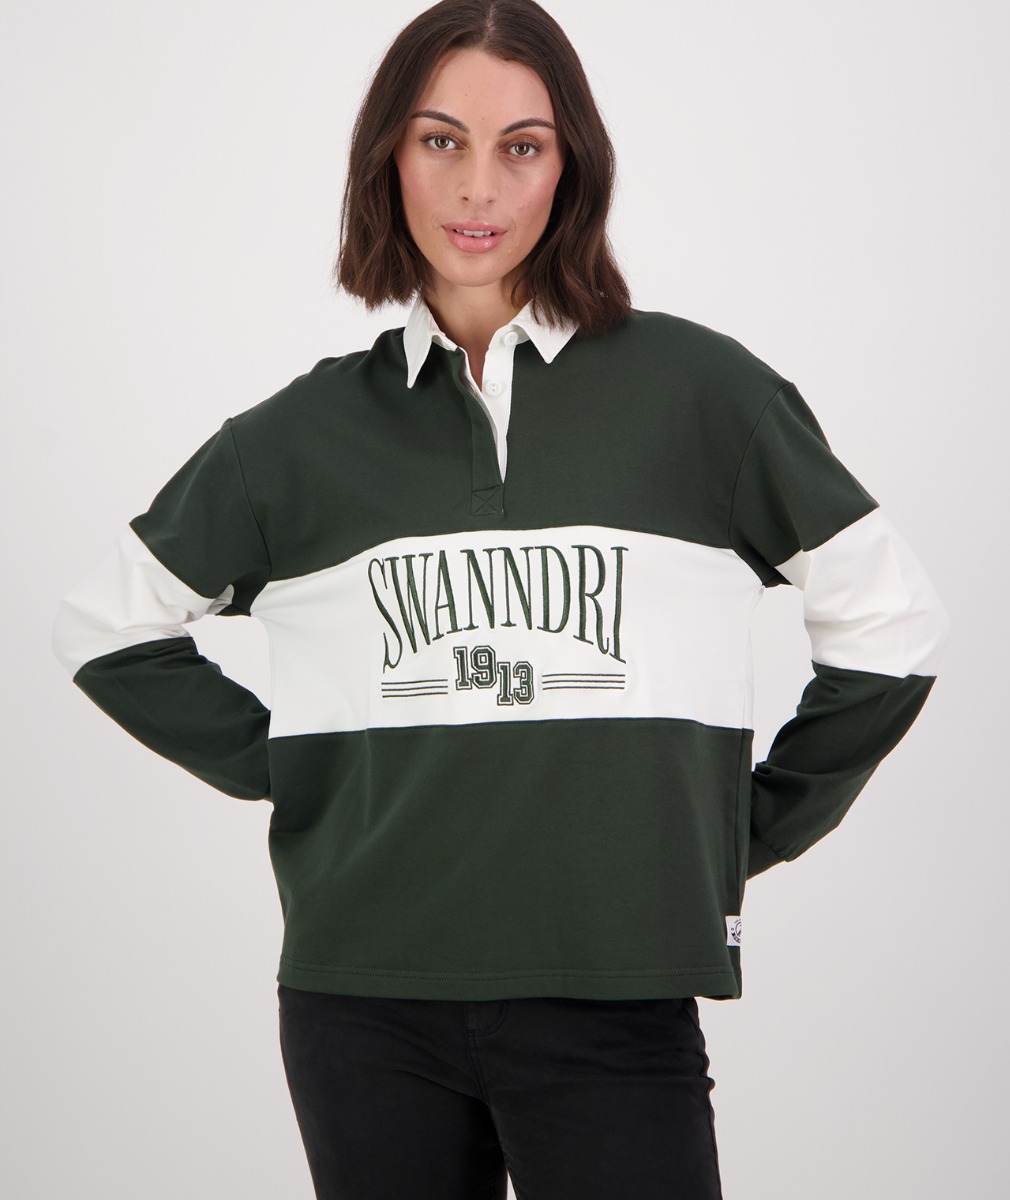 Women's Rutherford Long Sleeve Rugby Shirt